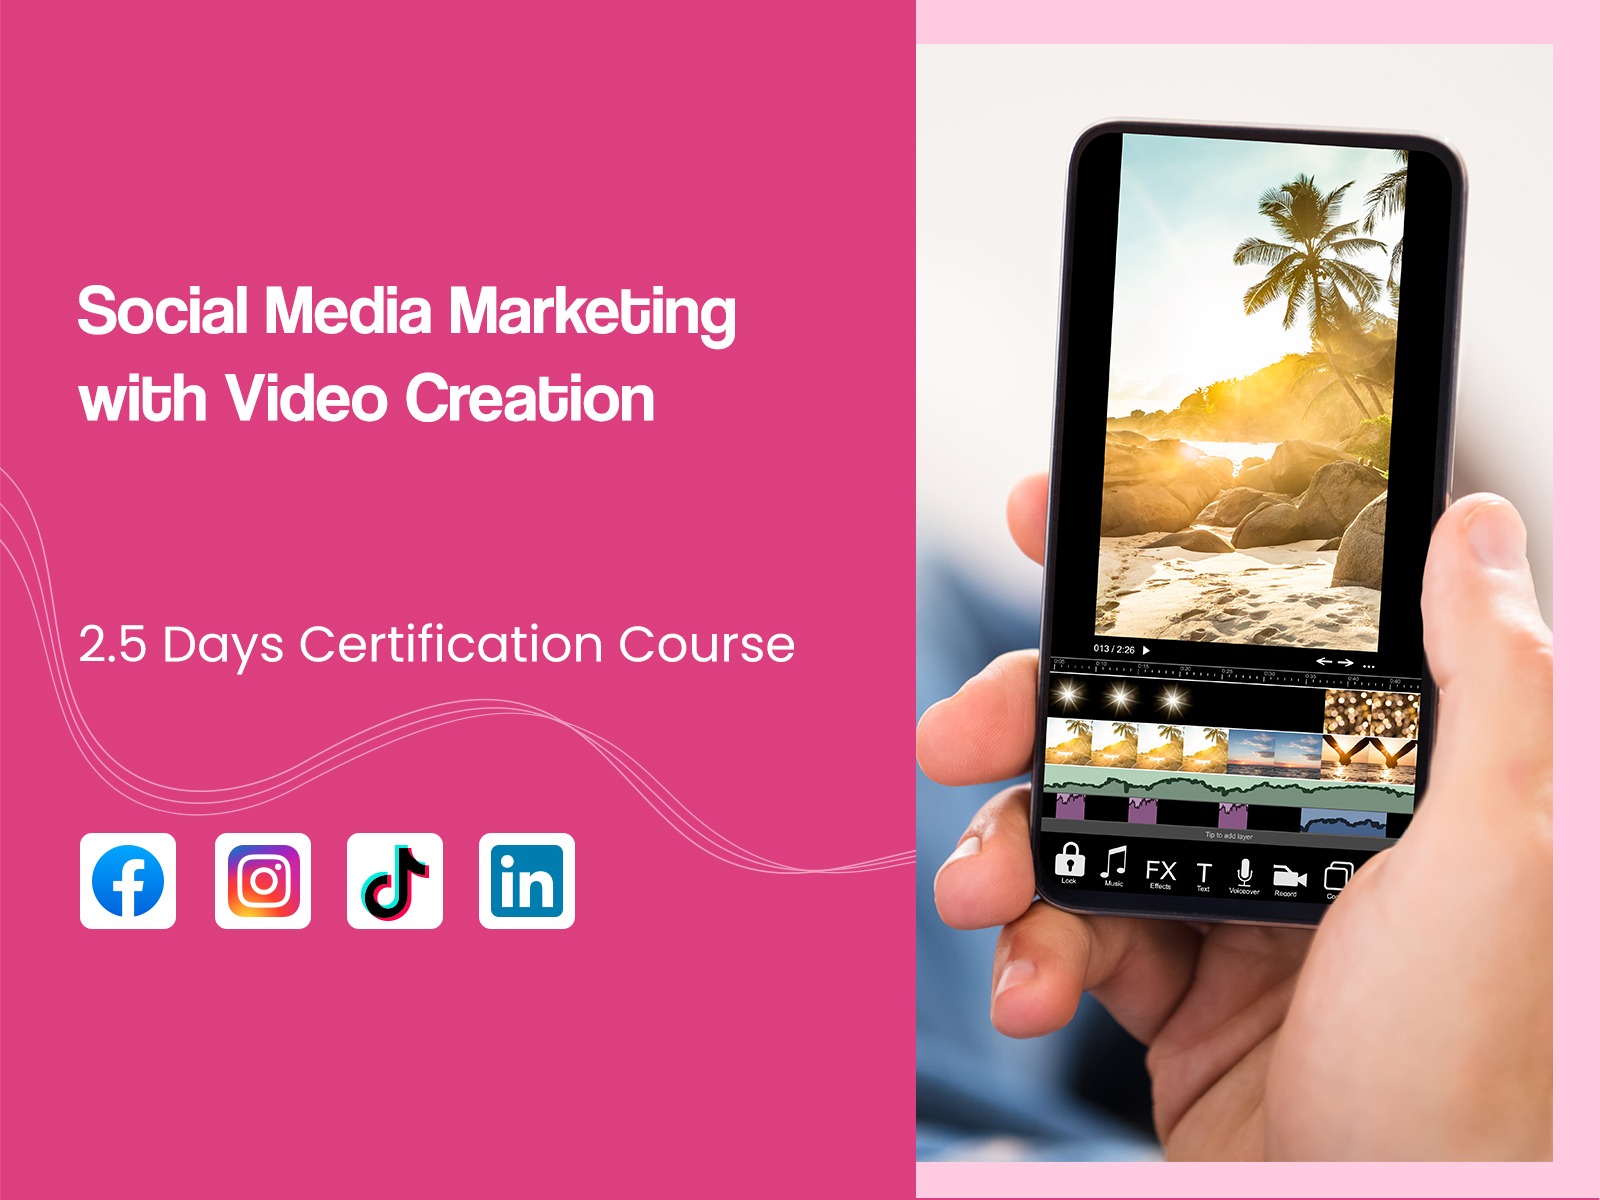 Social Media Marketing with Video Creation course in Singapore